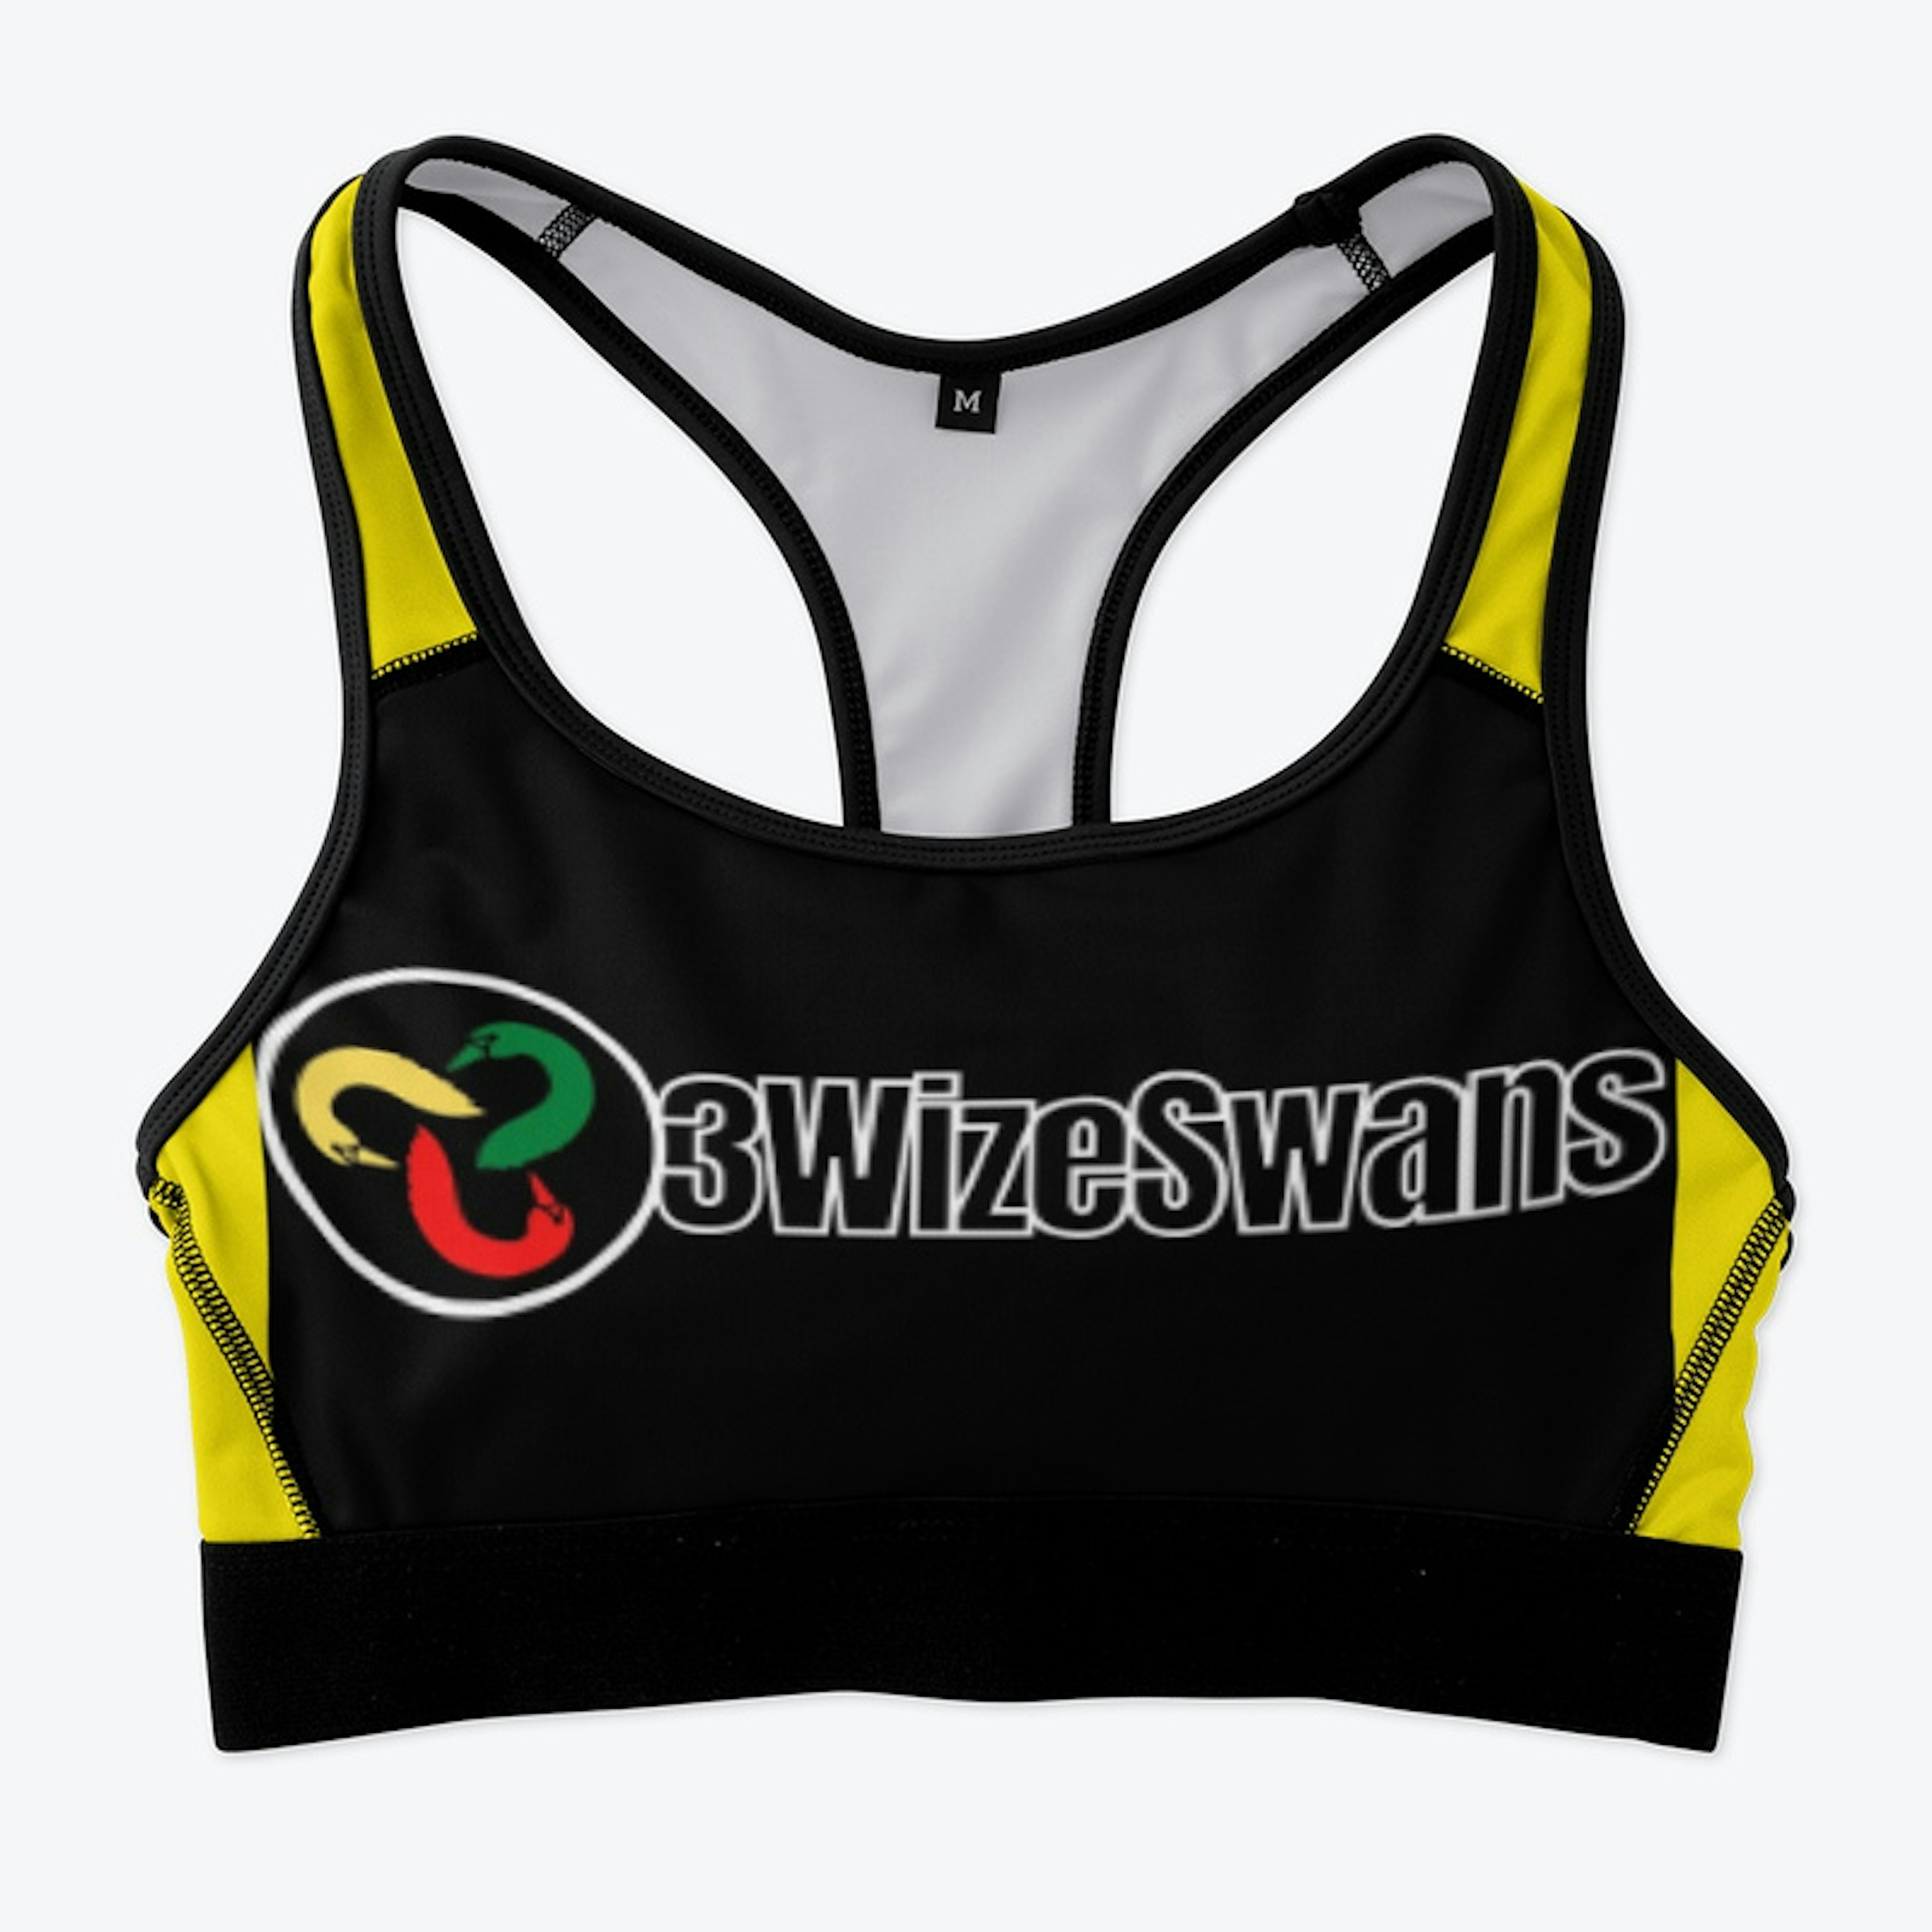 All-Over Sports Bra 3Wizeswans